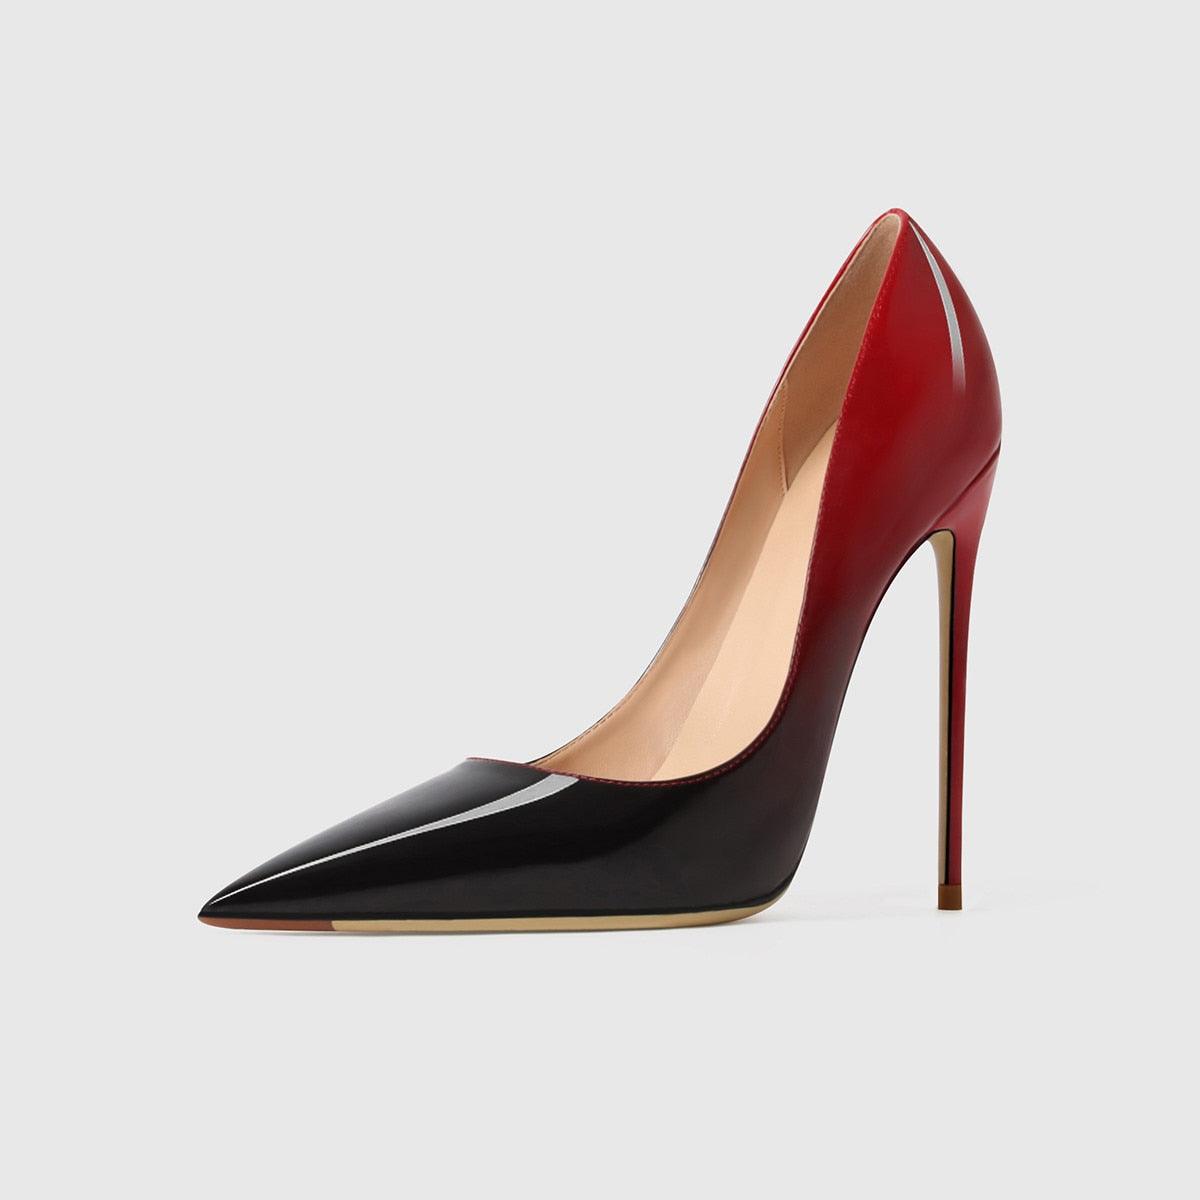 Gradient Patent Leather Shoes - Your Shiny Clothes